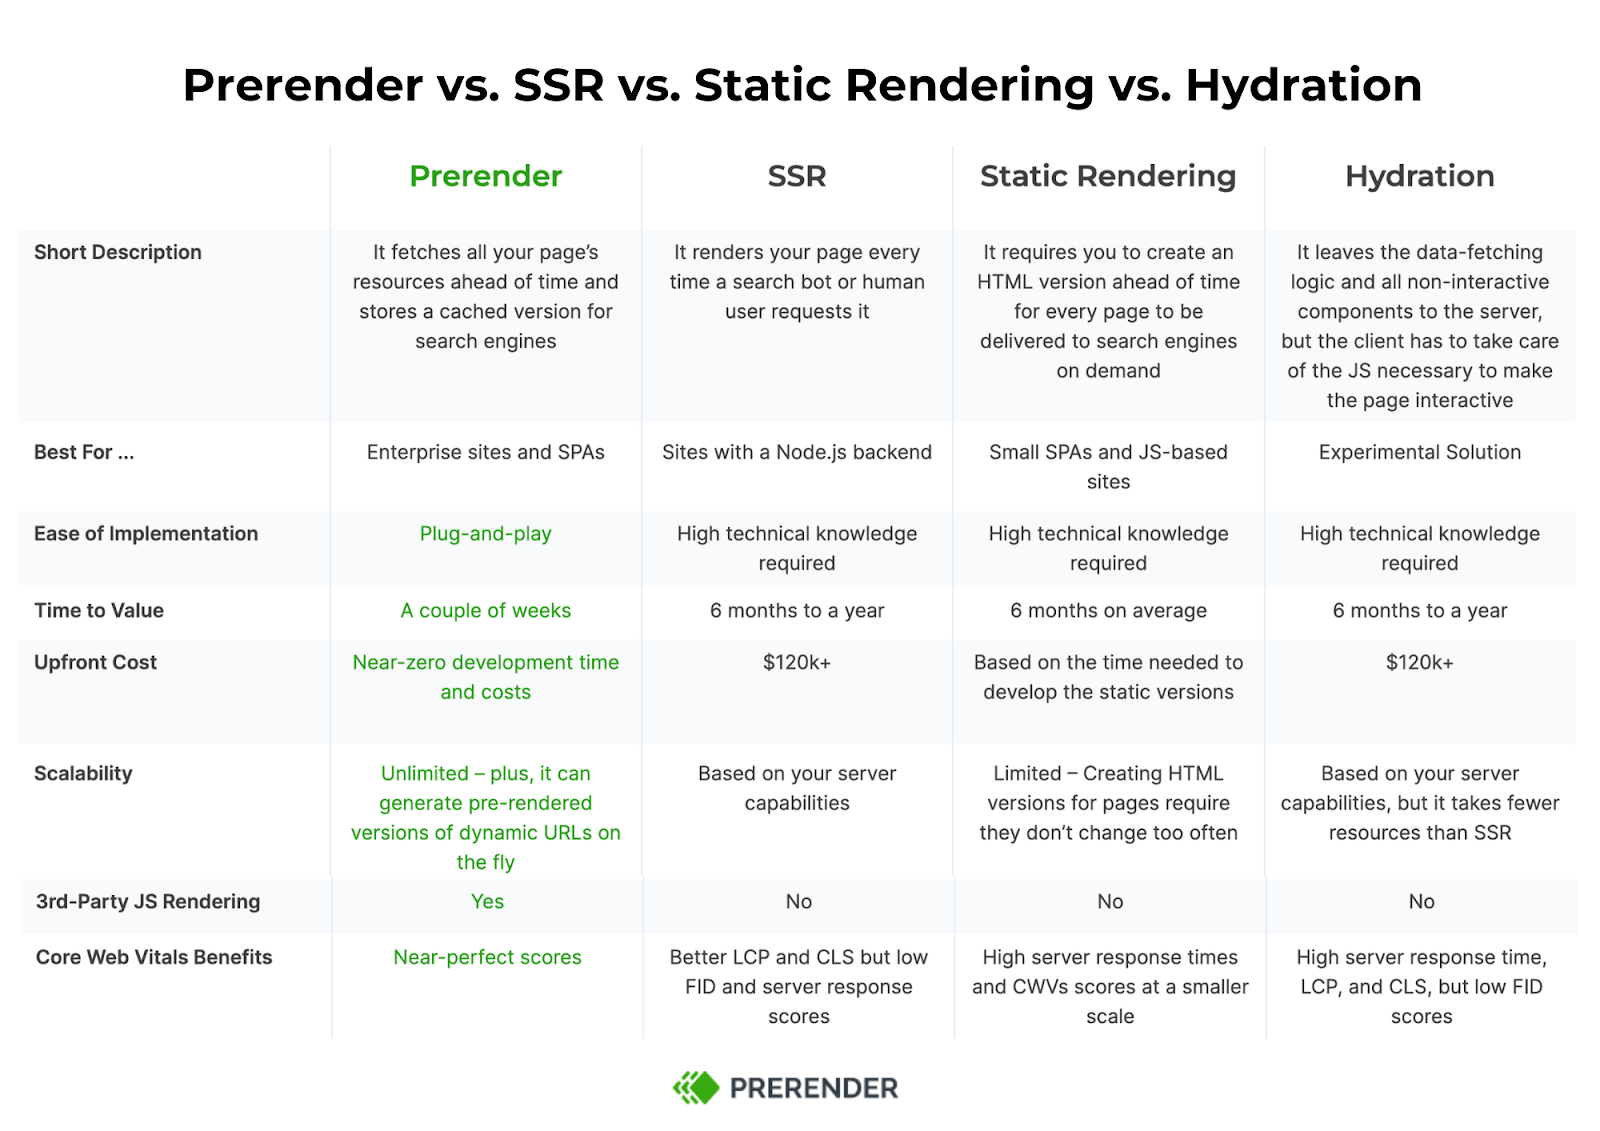 Prerendering vs. other types of rendering compared in a table format.